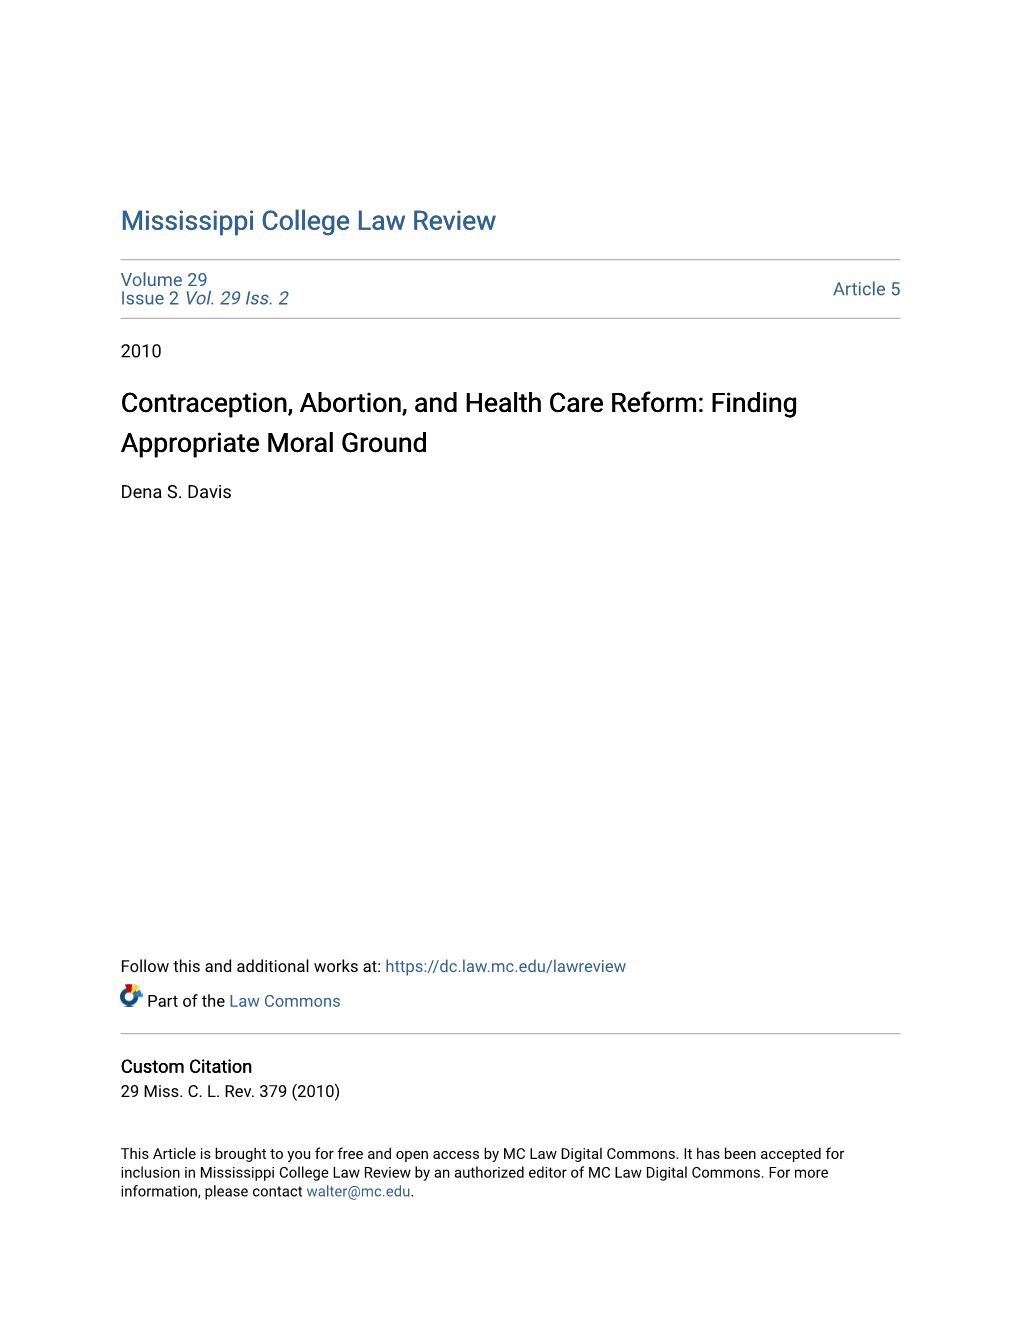 Contraception, Abortion, and Health Care Reform: Finding Appropriate Moral Ground